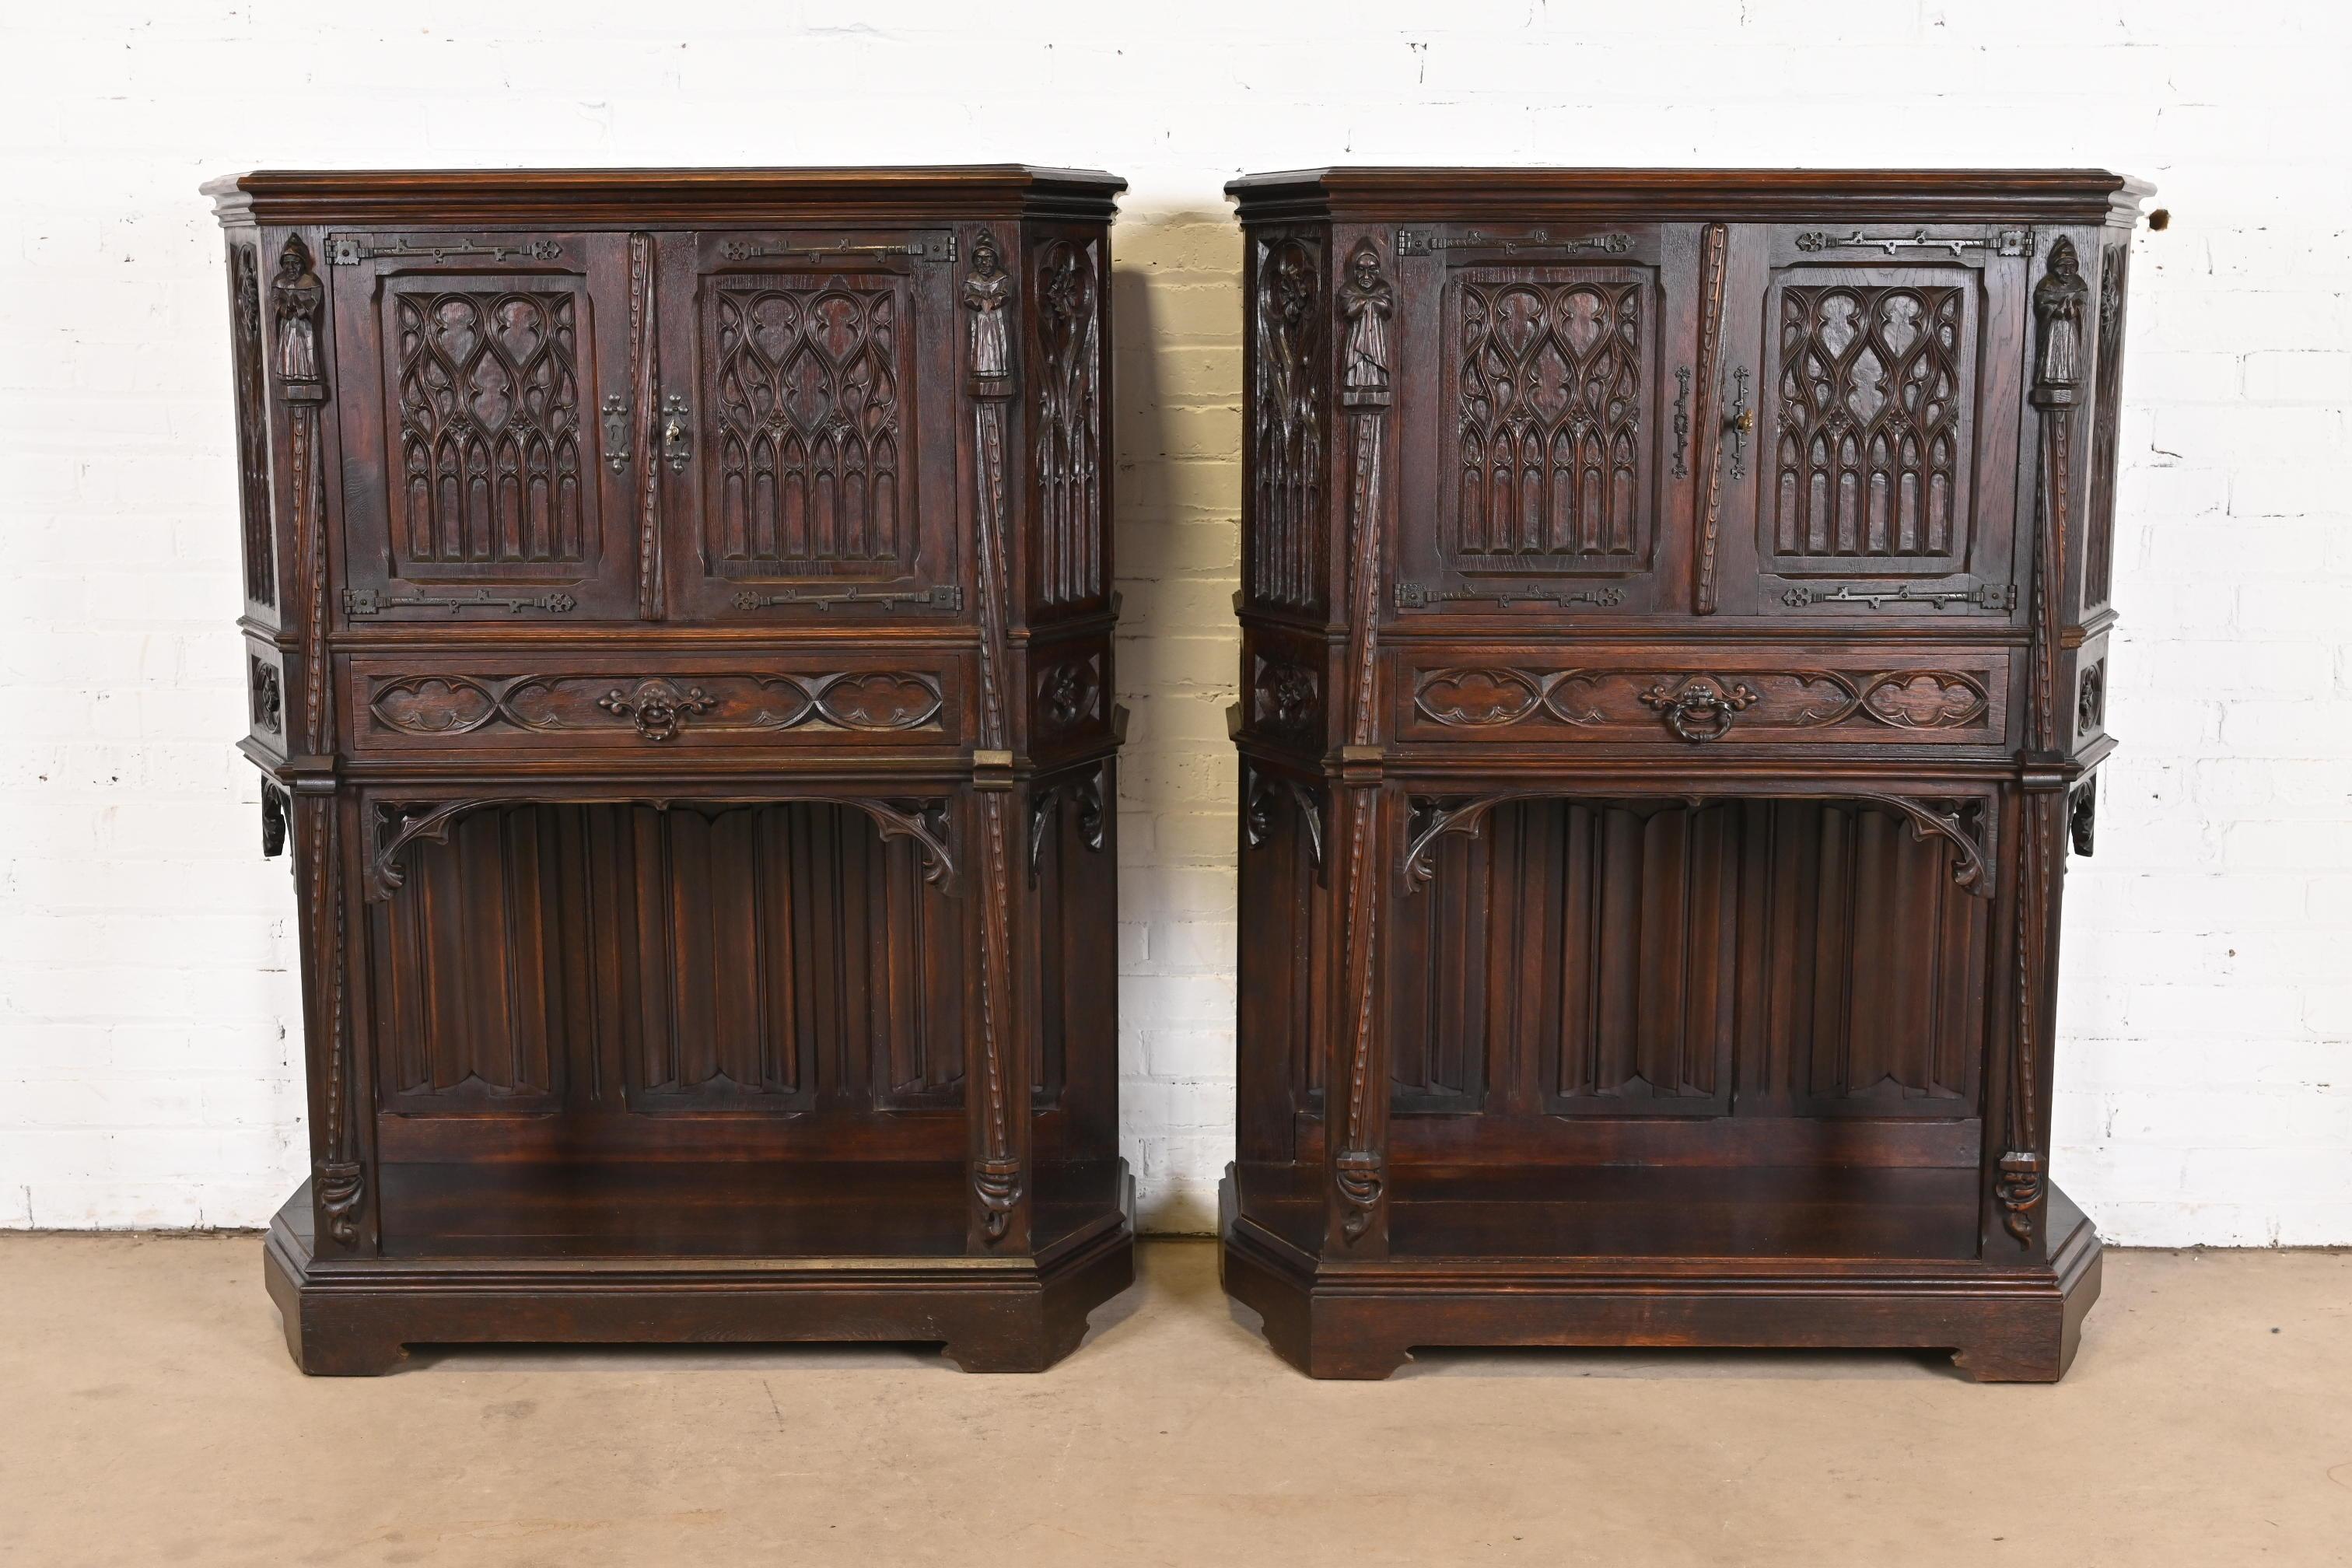 A gorgeous pair of antique Gothic or Renaissance Revival bar cabinets

In the manner of R.J. Horner

Belgium, Circa Late 19th Century

Carved dark oak, with original iron hardware.

Each measures: 39.25